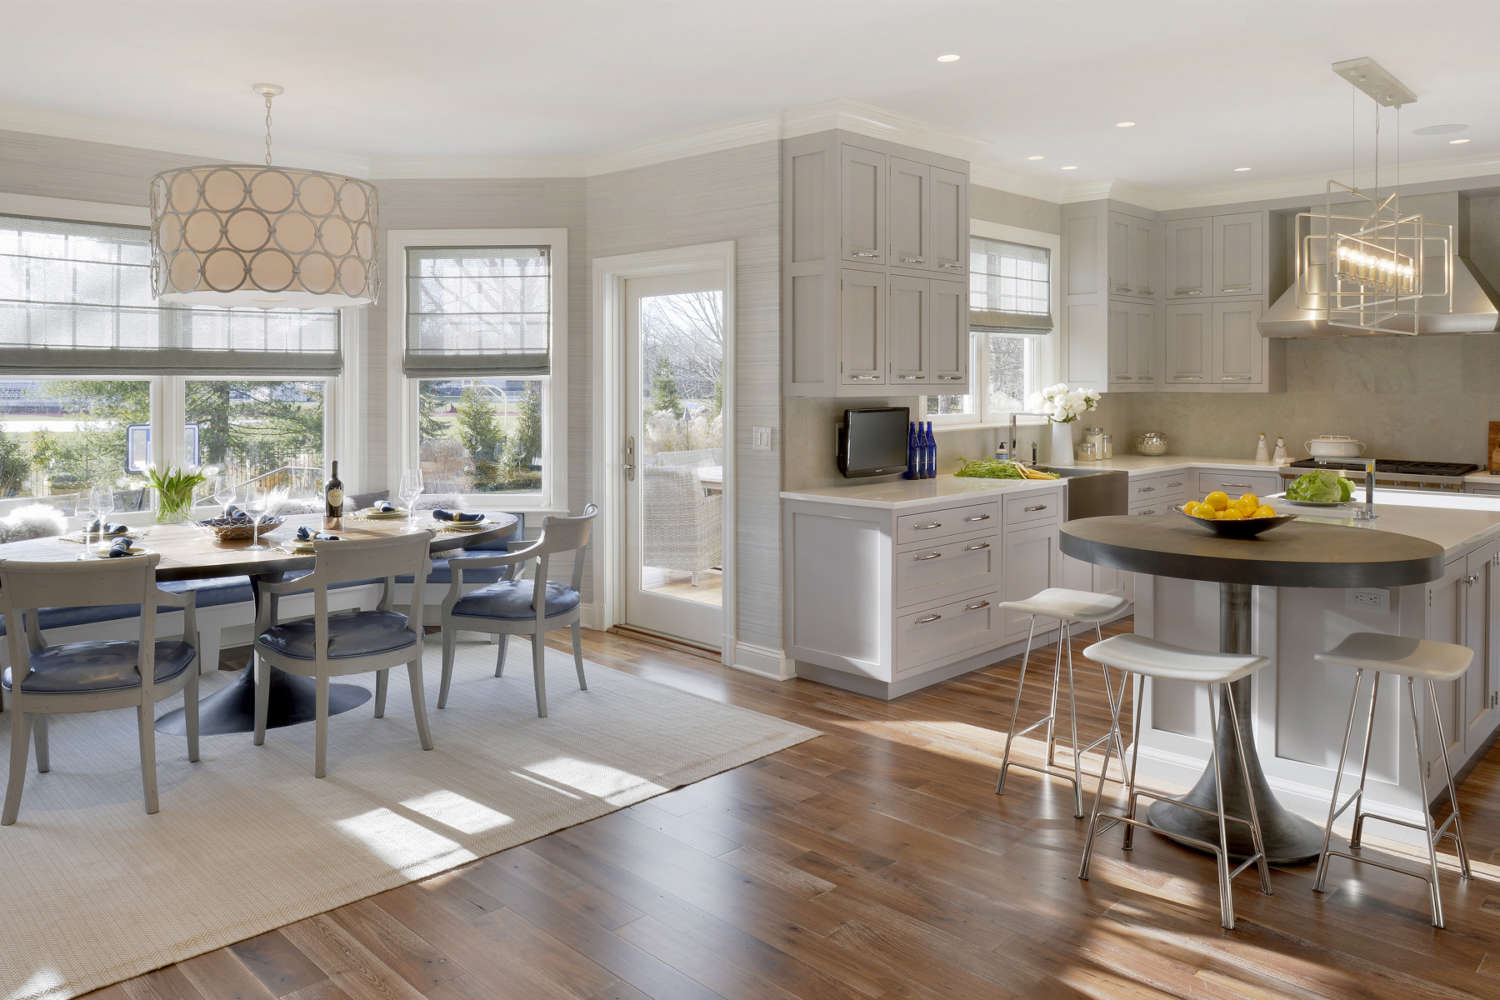 Kitchen features oak flooring, pale grey walls, white quartz countertops, custom shaker style double tiered Bilotta cabinetry in a mix of rift cut white oak and white painted finish, and a center island with adjoining table with seating.